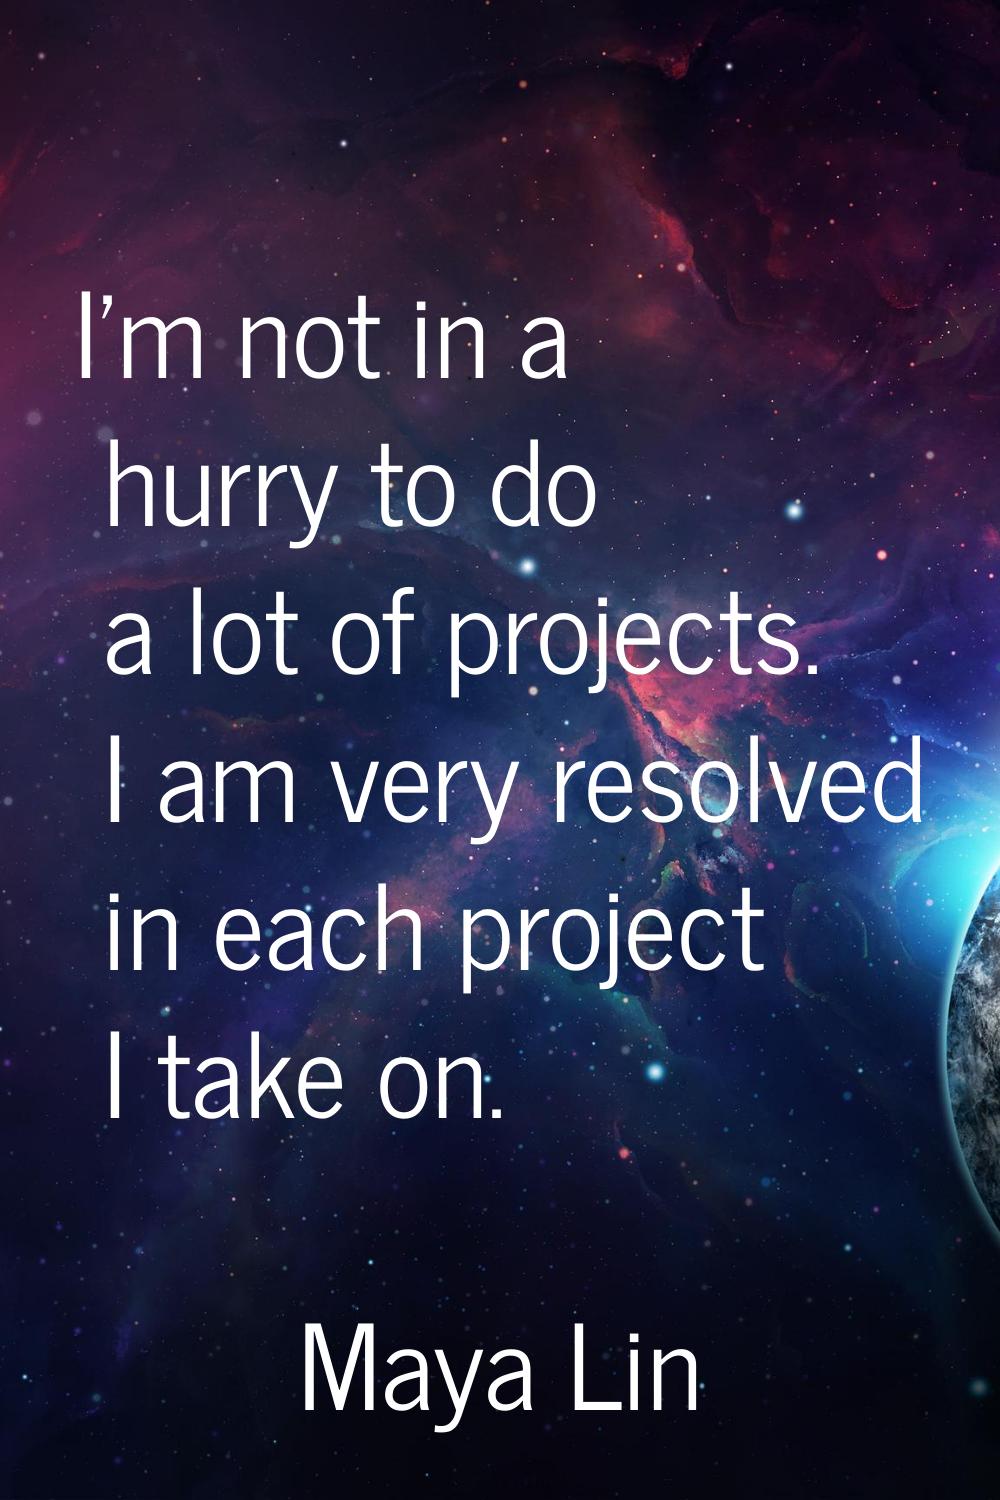 I'm not in a hurry to do a lot of projects. I am very resolved in each project I take on.